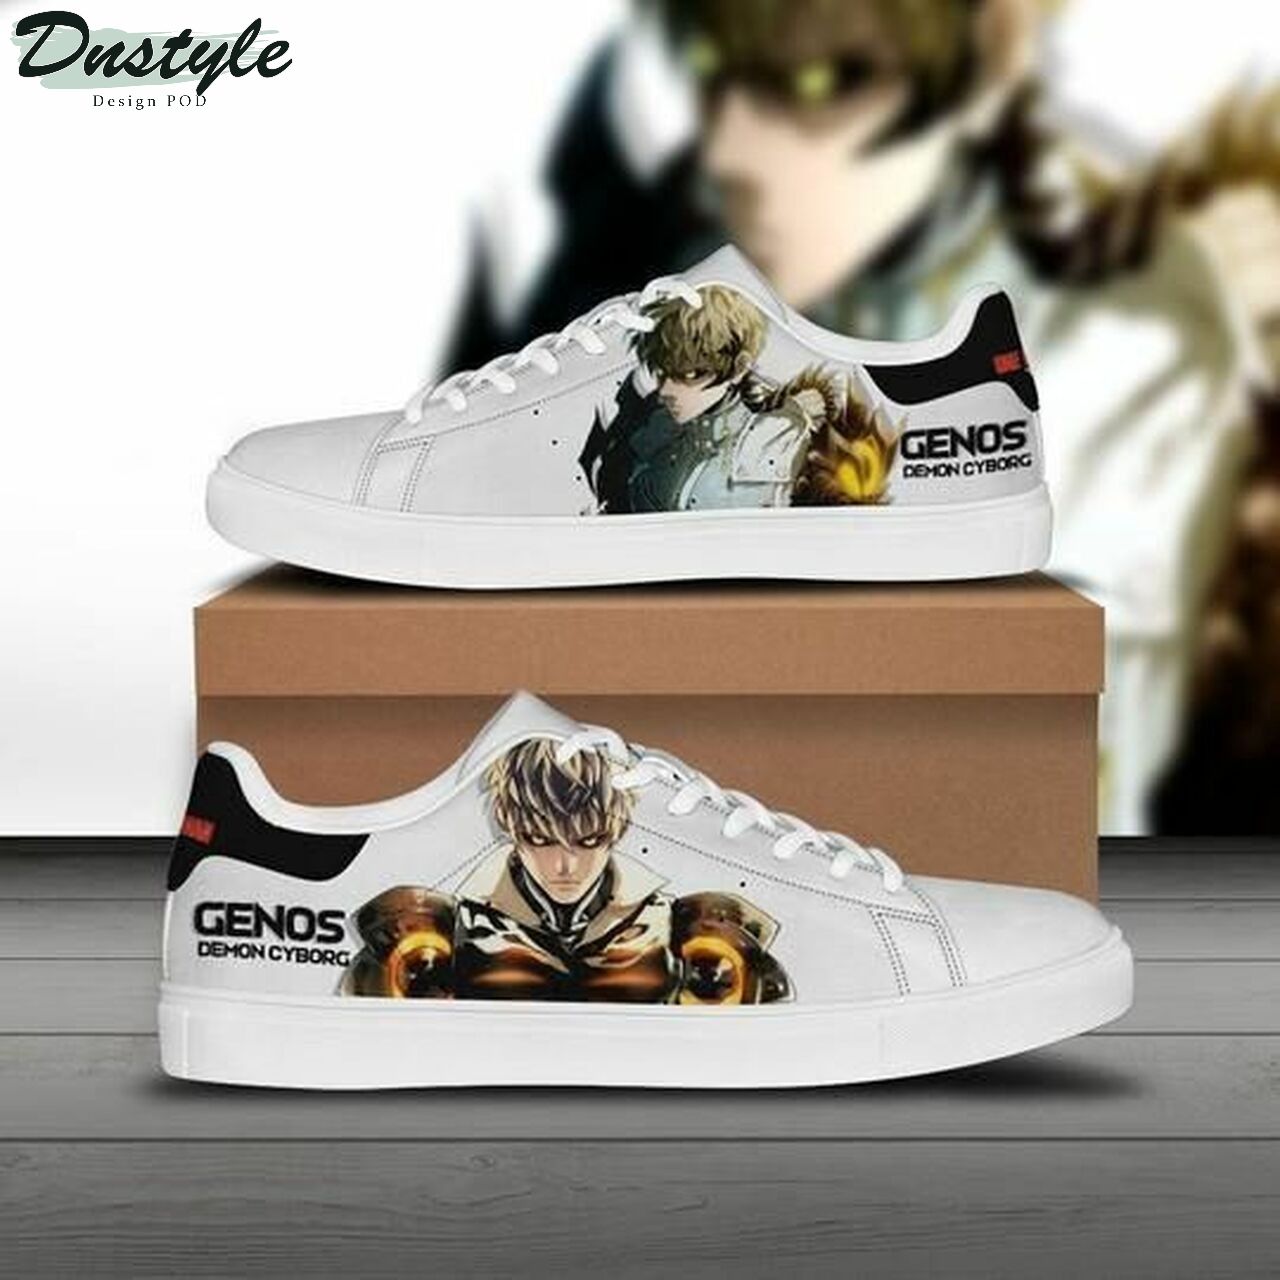 Genos one punch man stan smith low top skate shoes